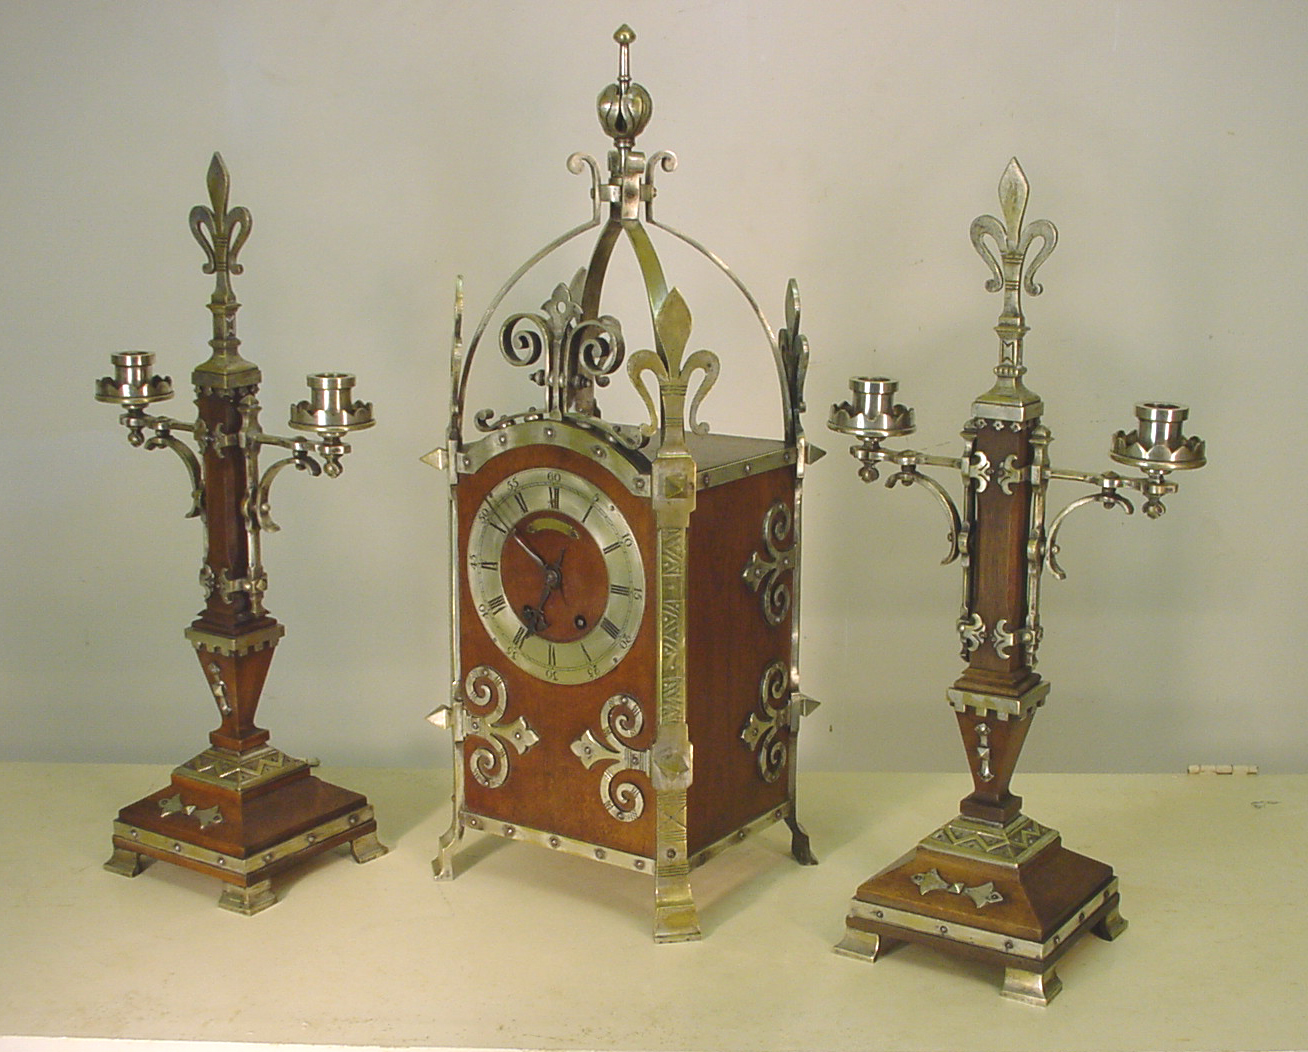 Clock garniture in Arts and Crafts style